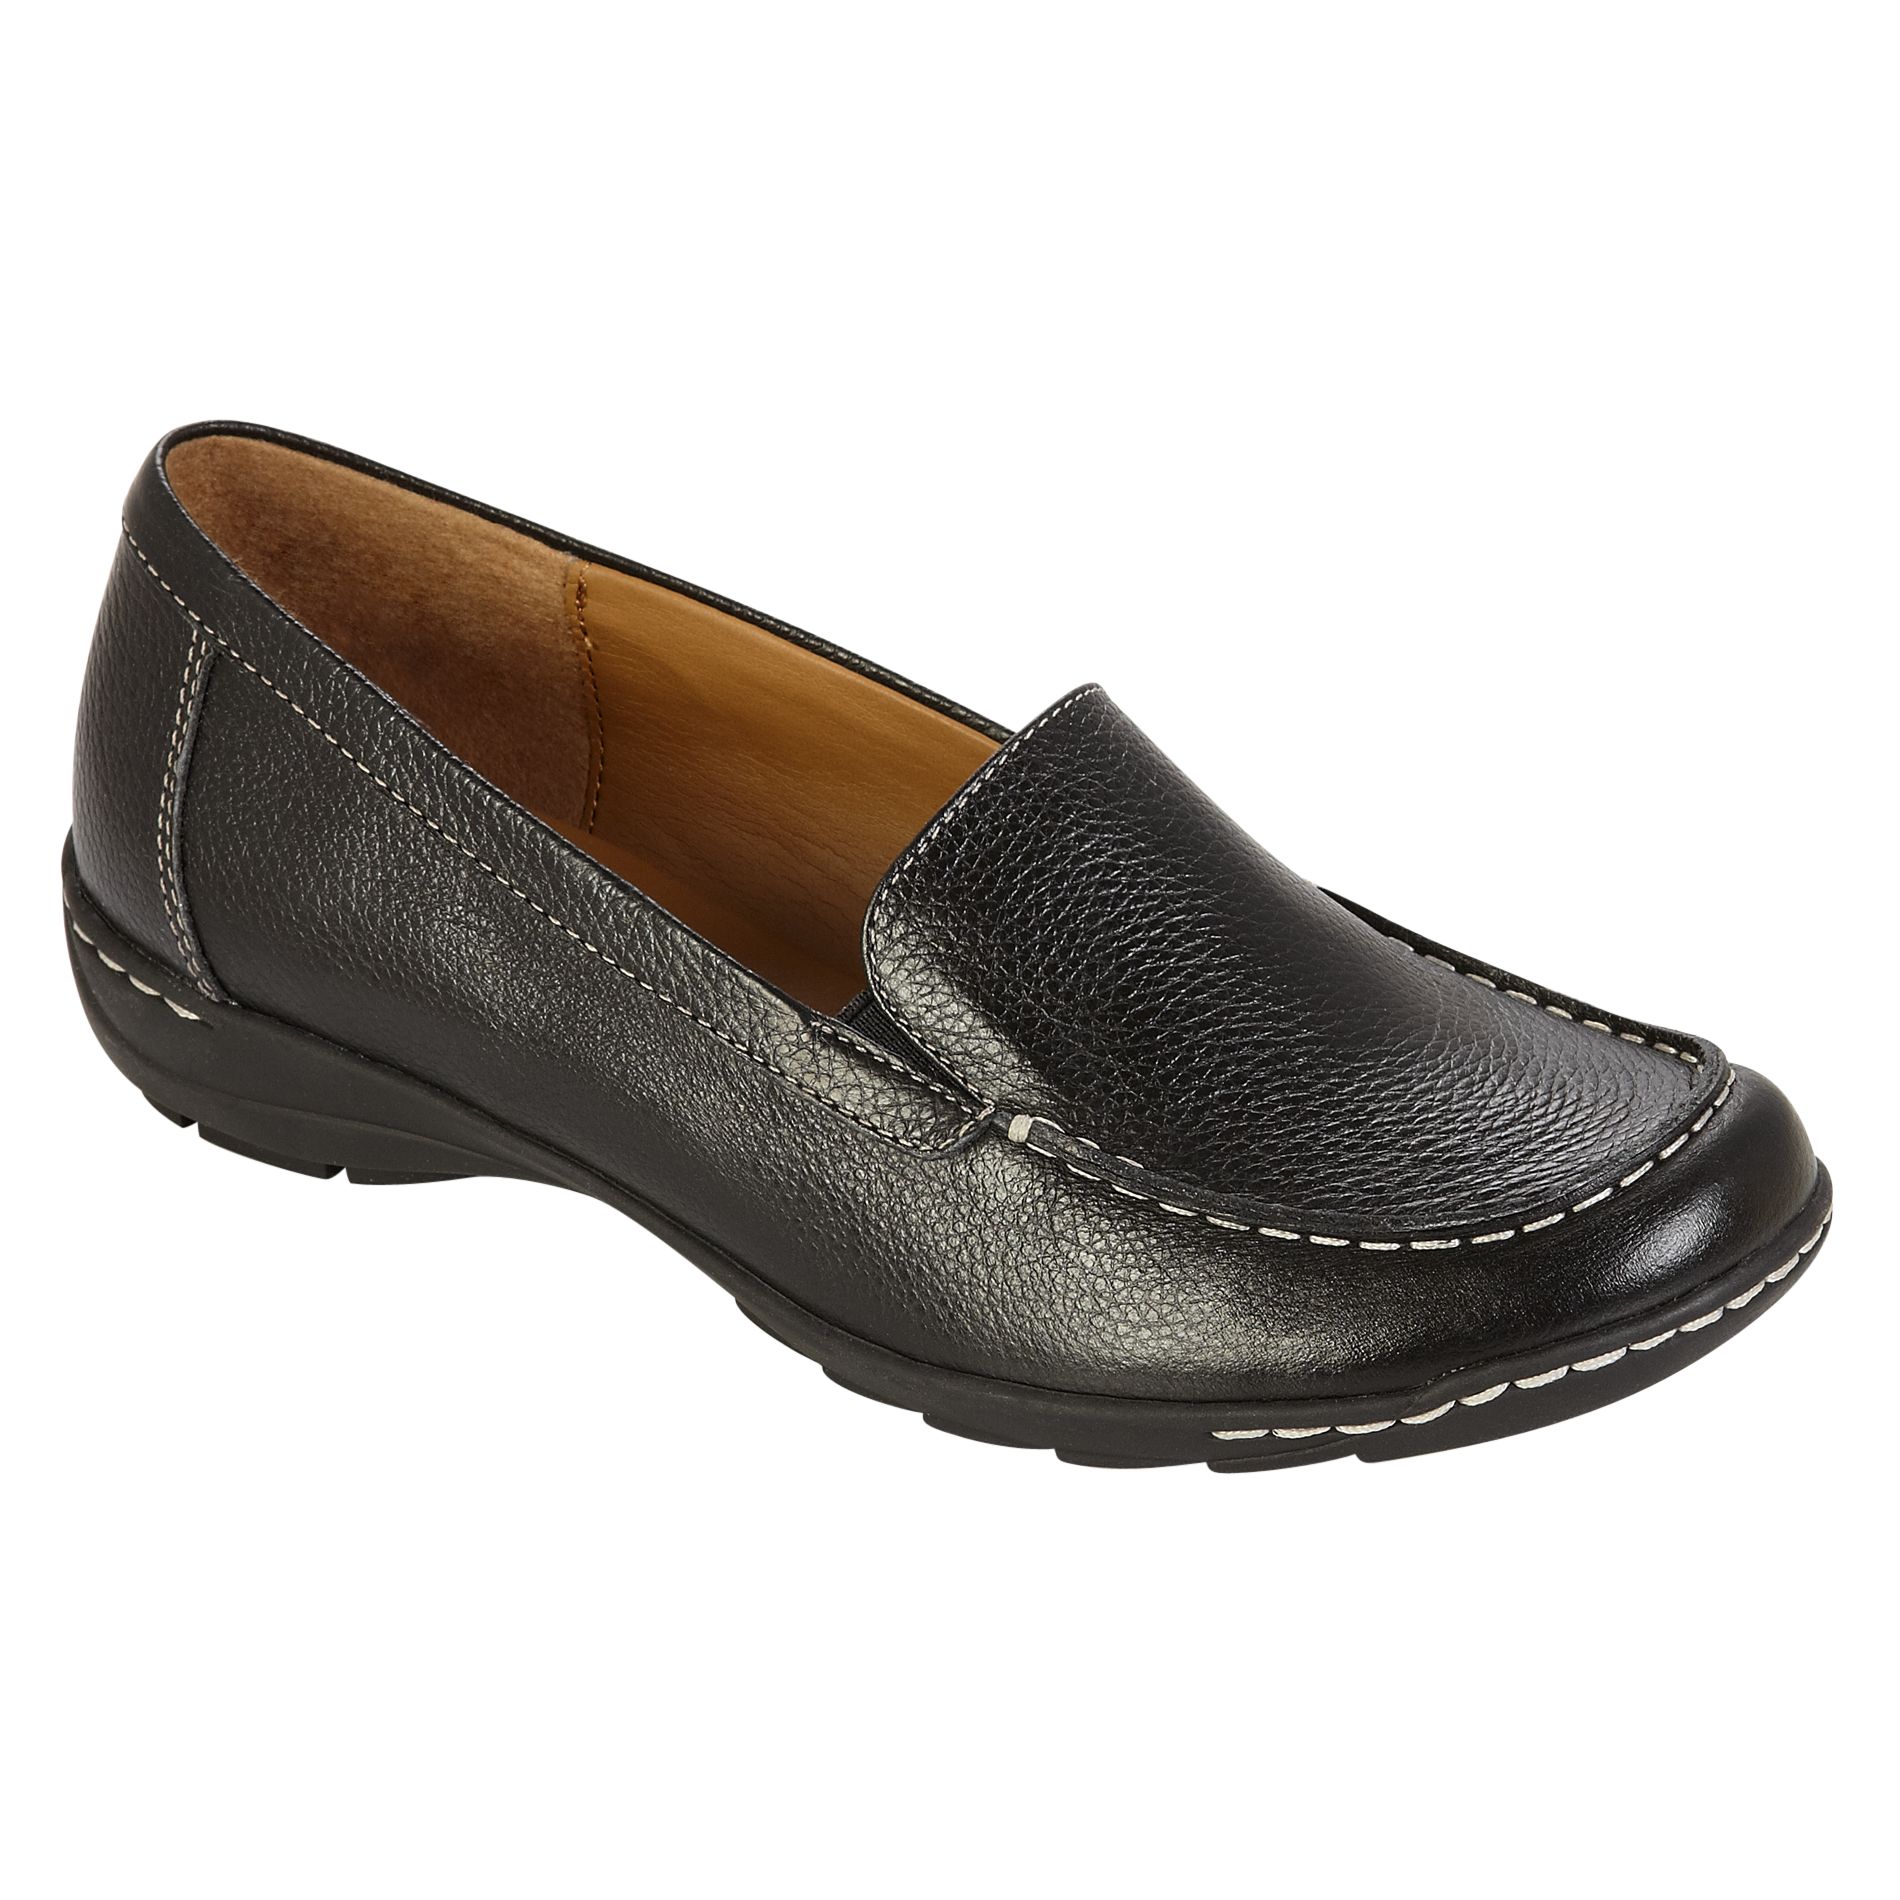 I Love Comfort Women's Larson Casual Leather Loafer Wide Width Avaliable- Black